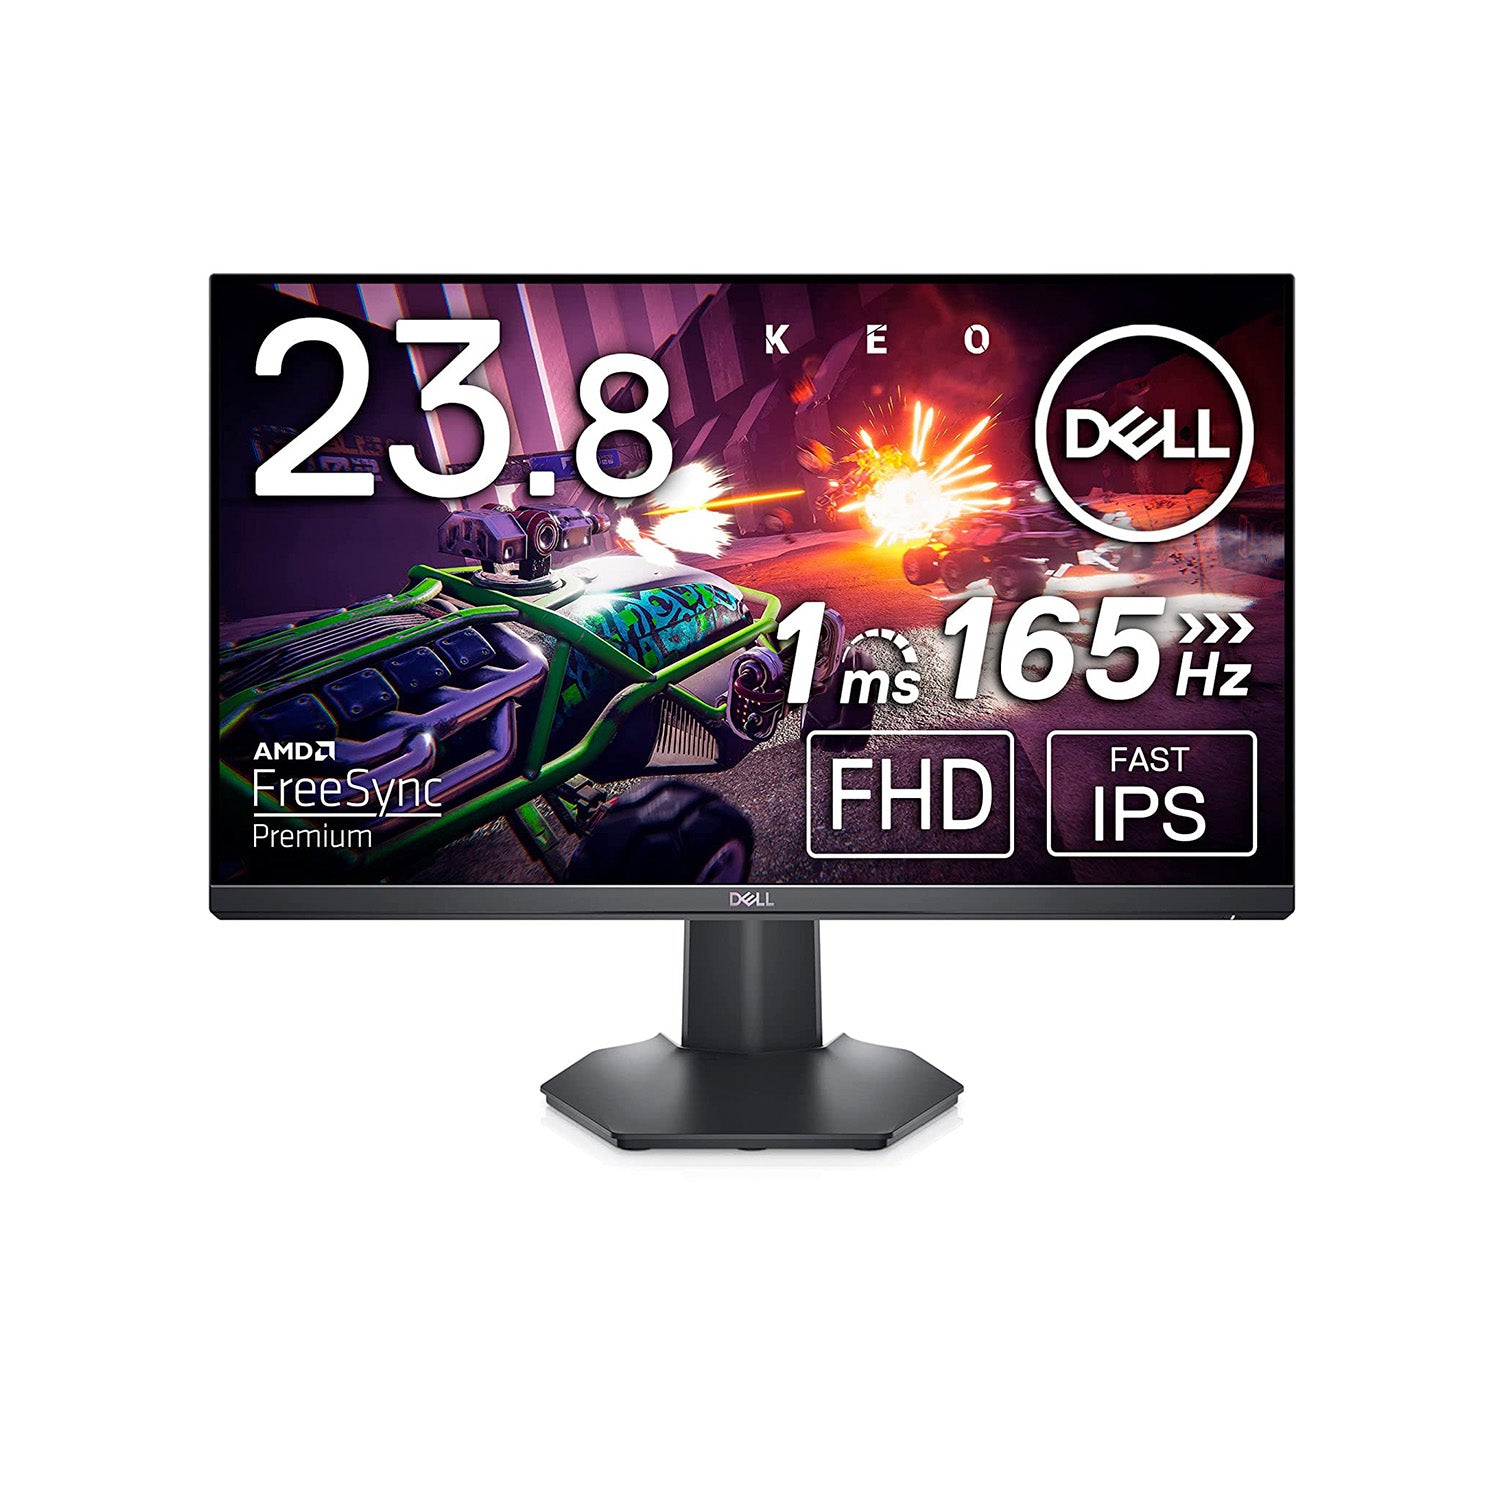 Dell 24" Inch Gaming Monitor -Full HD (1080p) at 165 Hz -1ms Response Time, IPS, AMD FreeSync Technology, 99% sRGB Color Gamut, NVIDIA G-Sync Compatible, HDMI, DisplayPort, Black- G2422HS